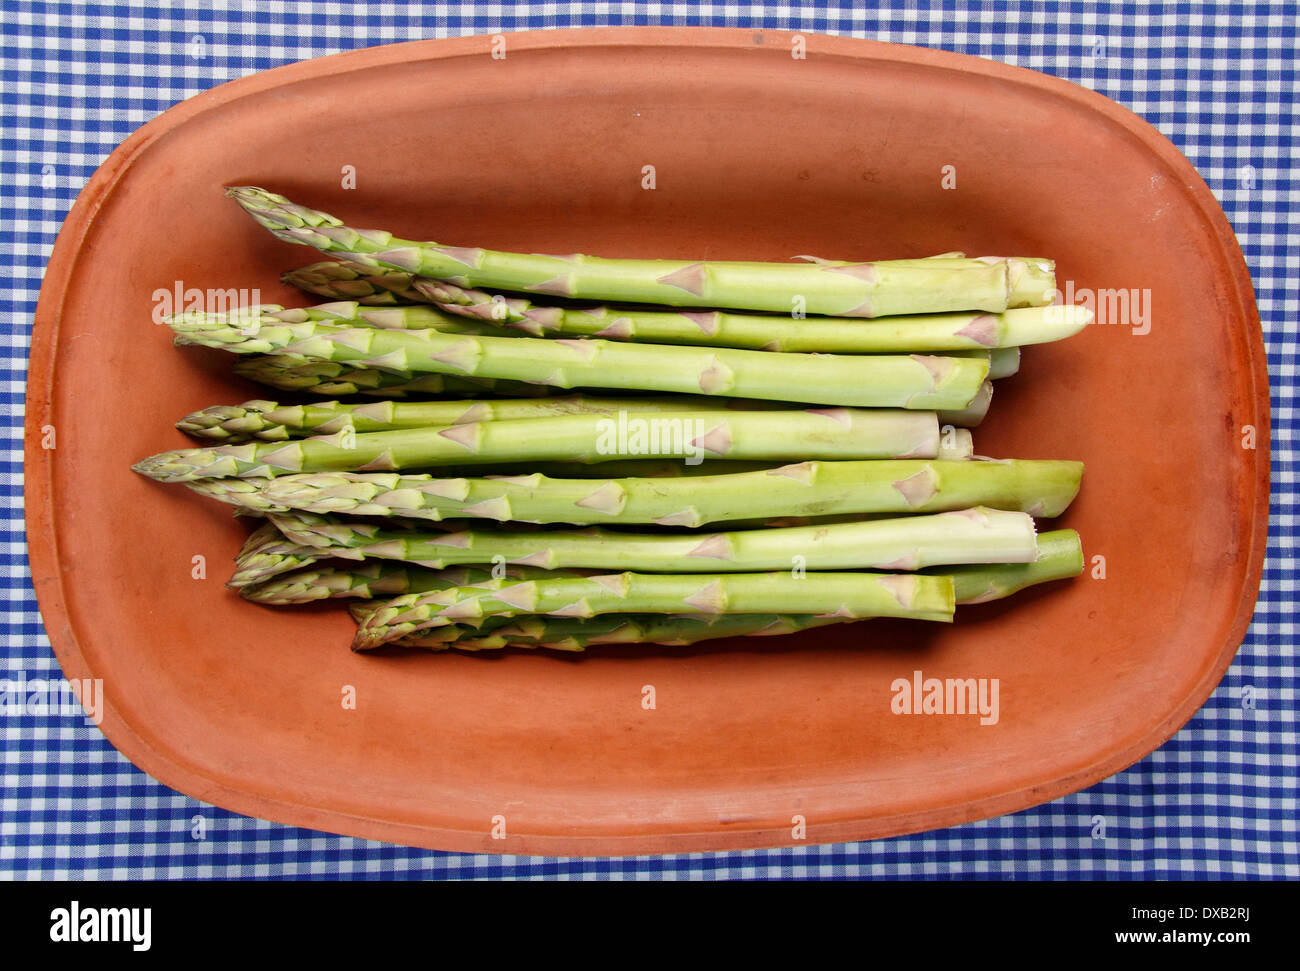 A loose bunch of fresh green asparagus spears in a  rustic terracotta clay dish against a vintage blue & white gingham cloth, UK Stock Photo